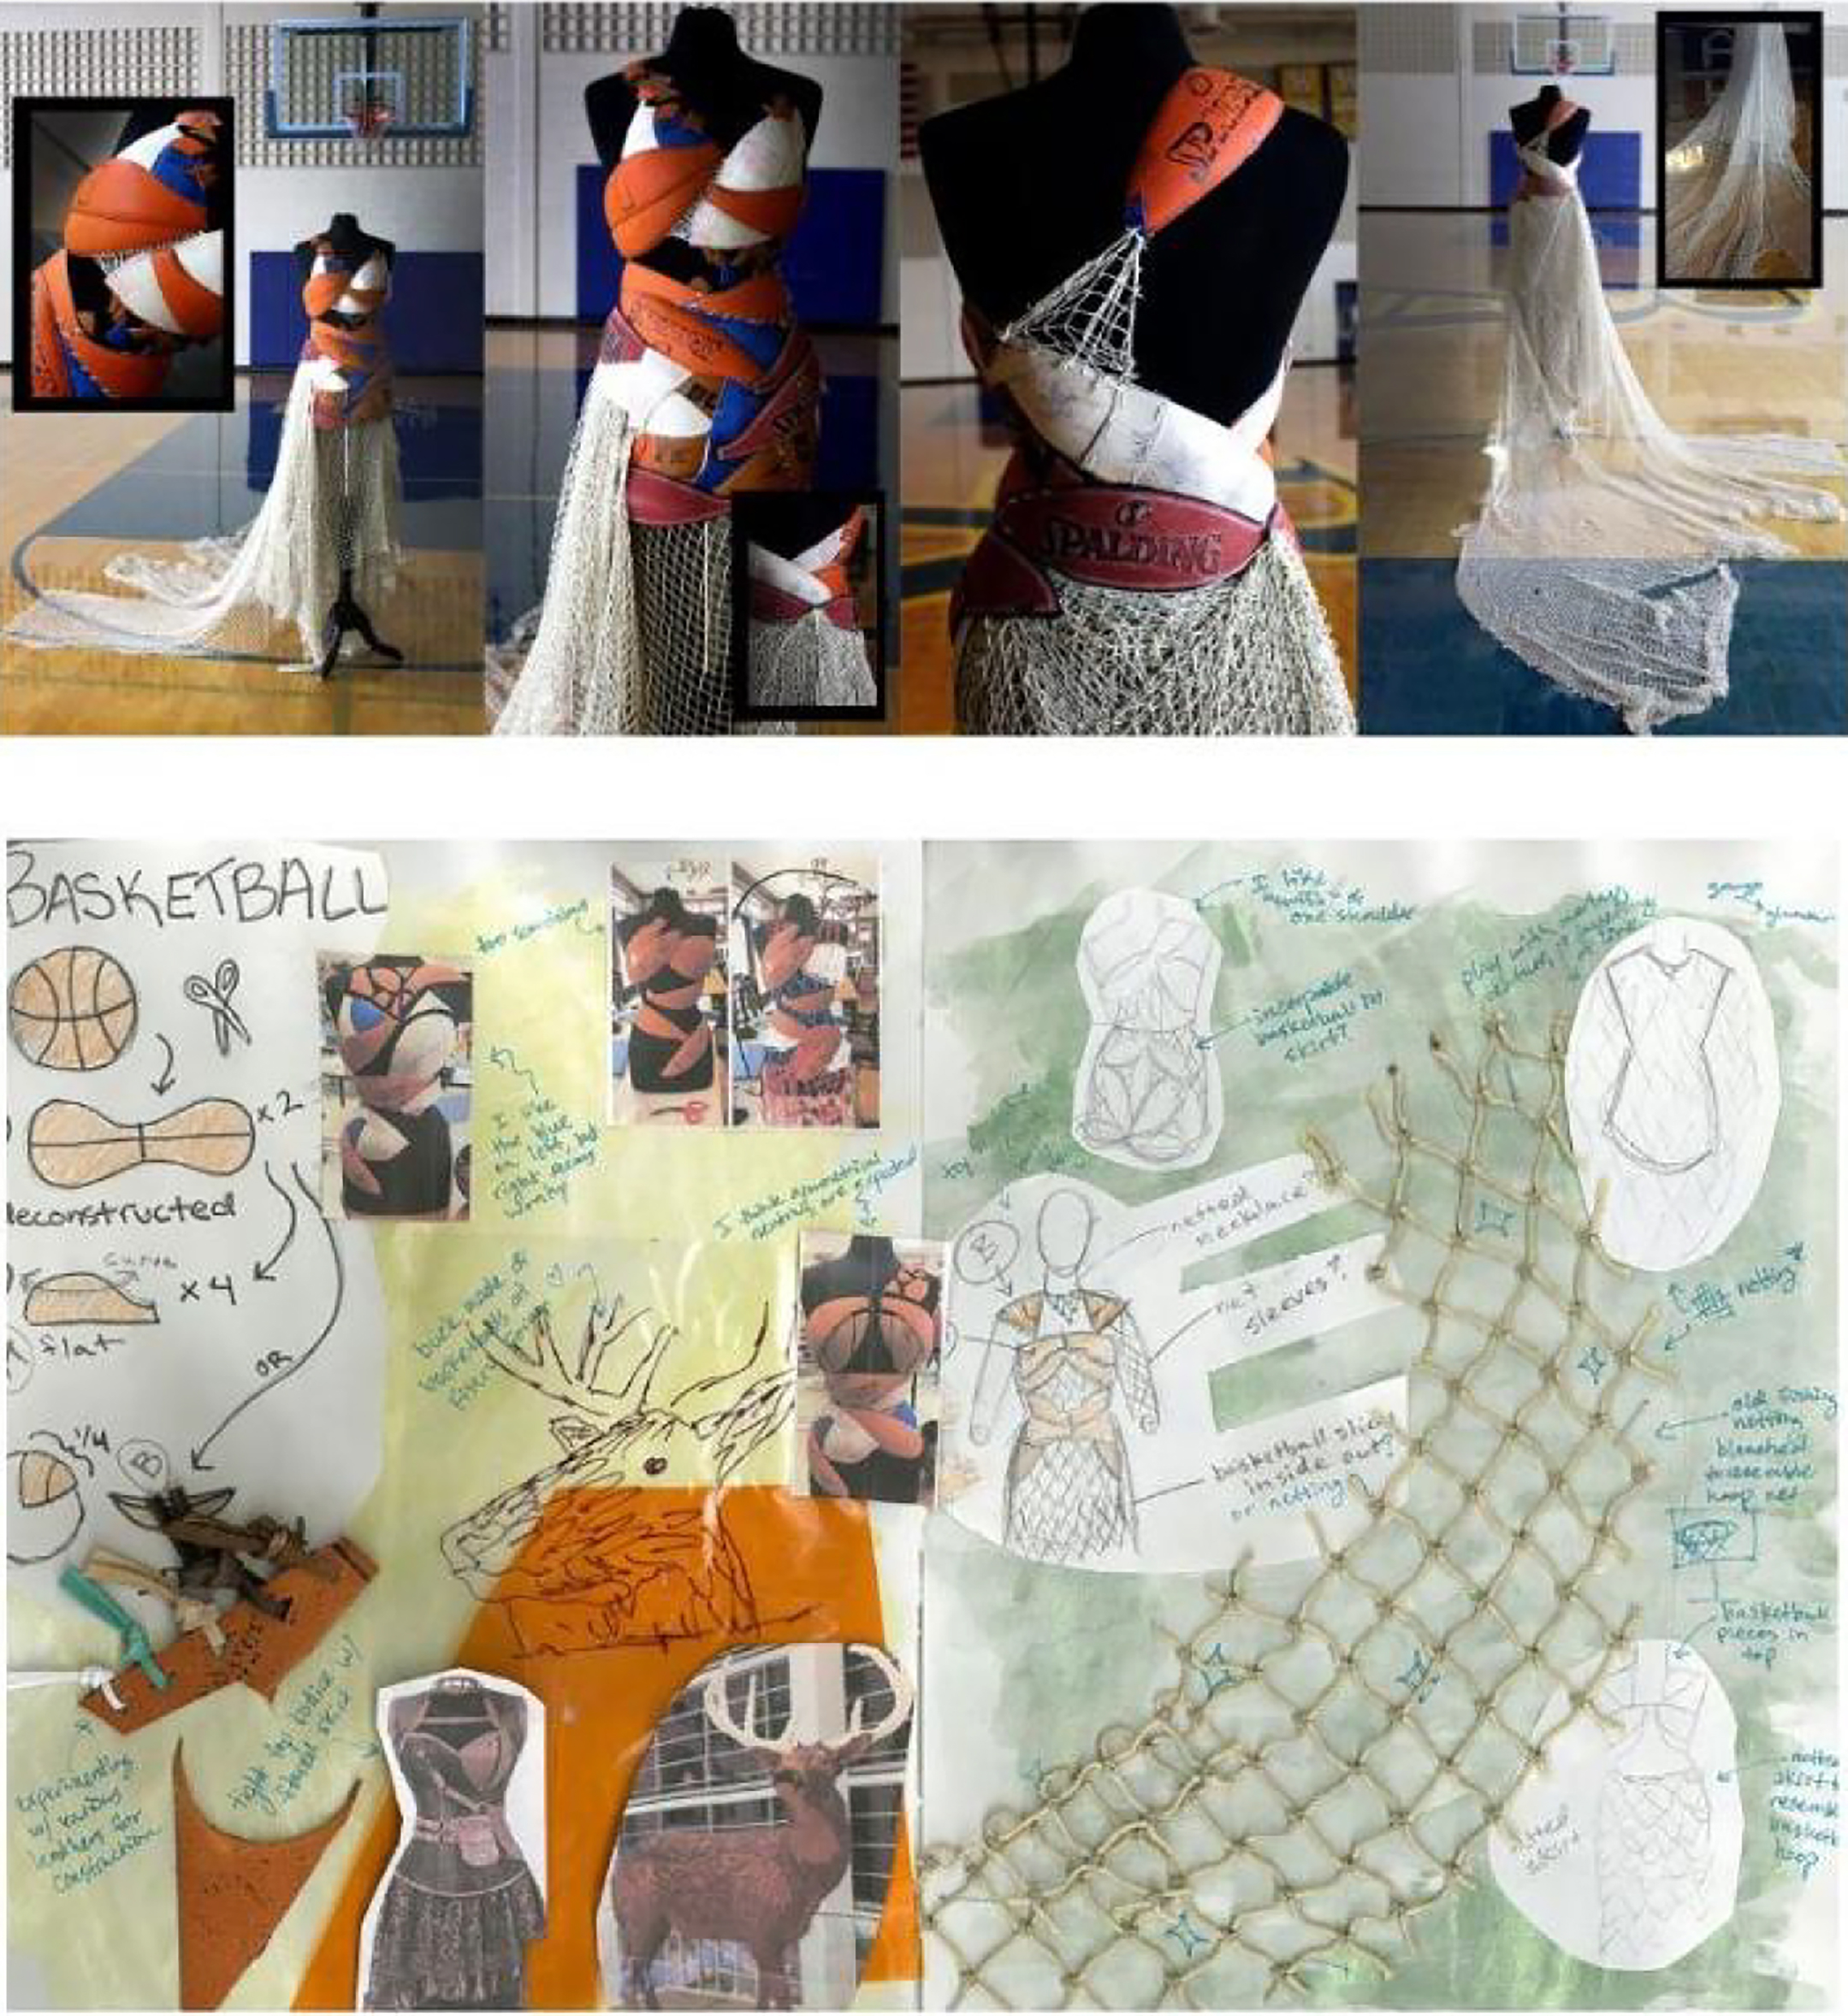 Detail of notebook sketches showing how the basketball dress was created